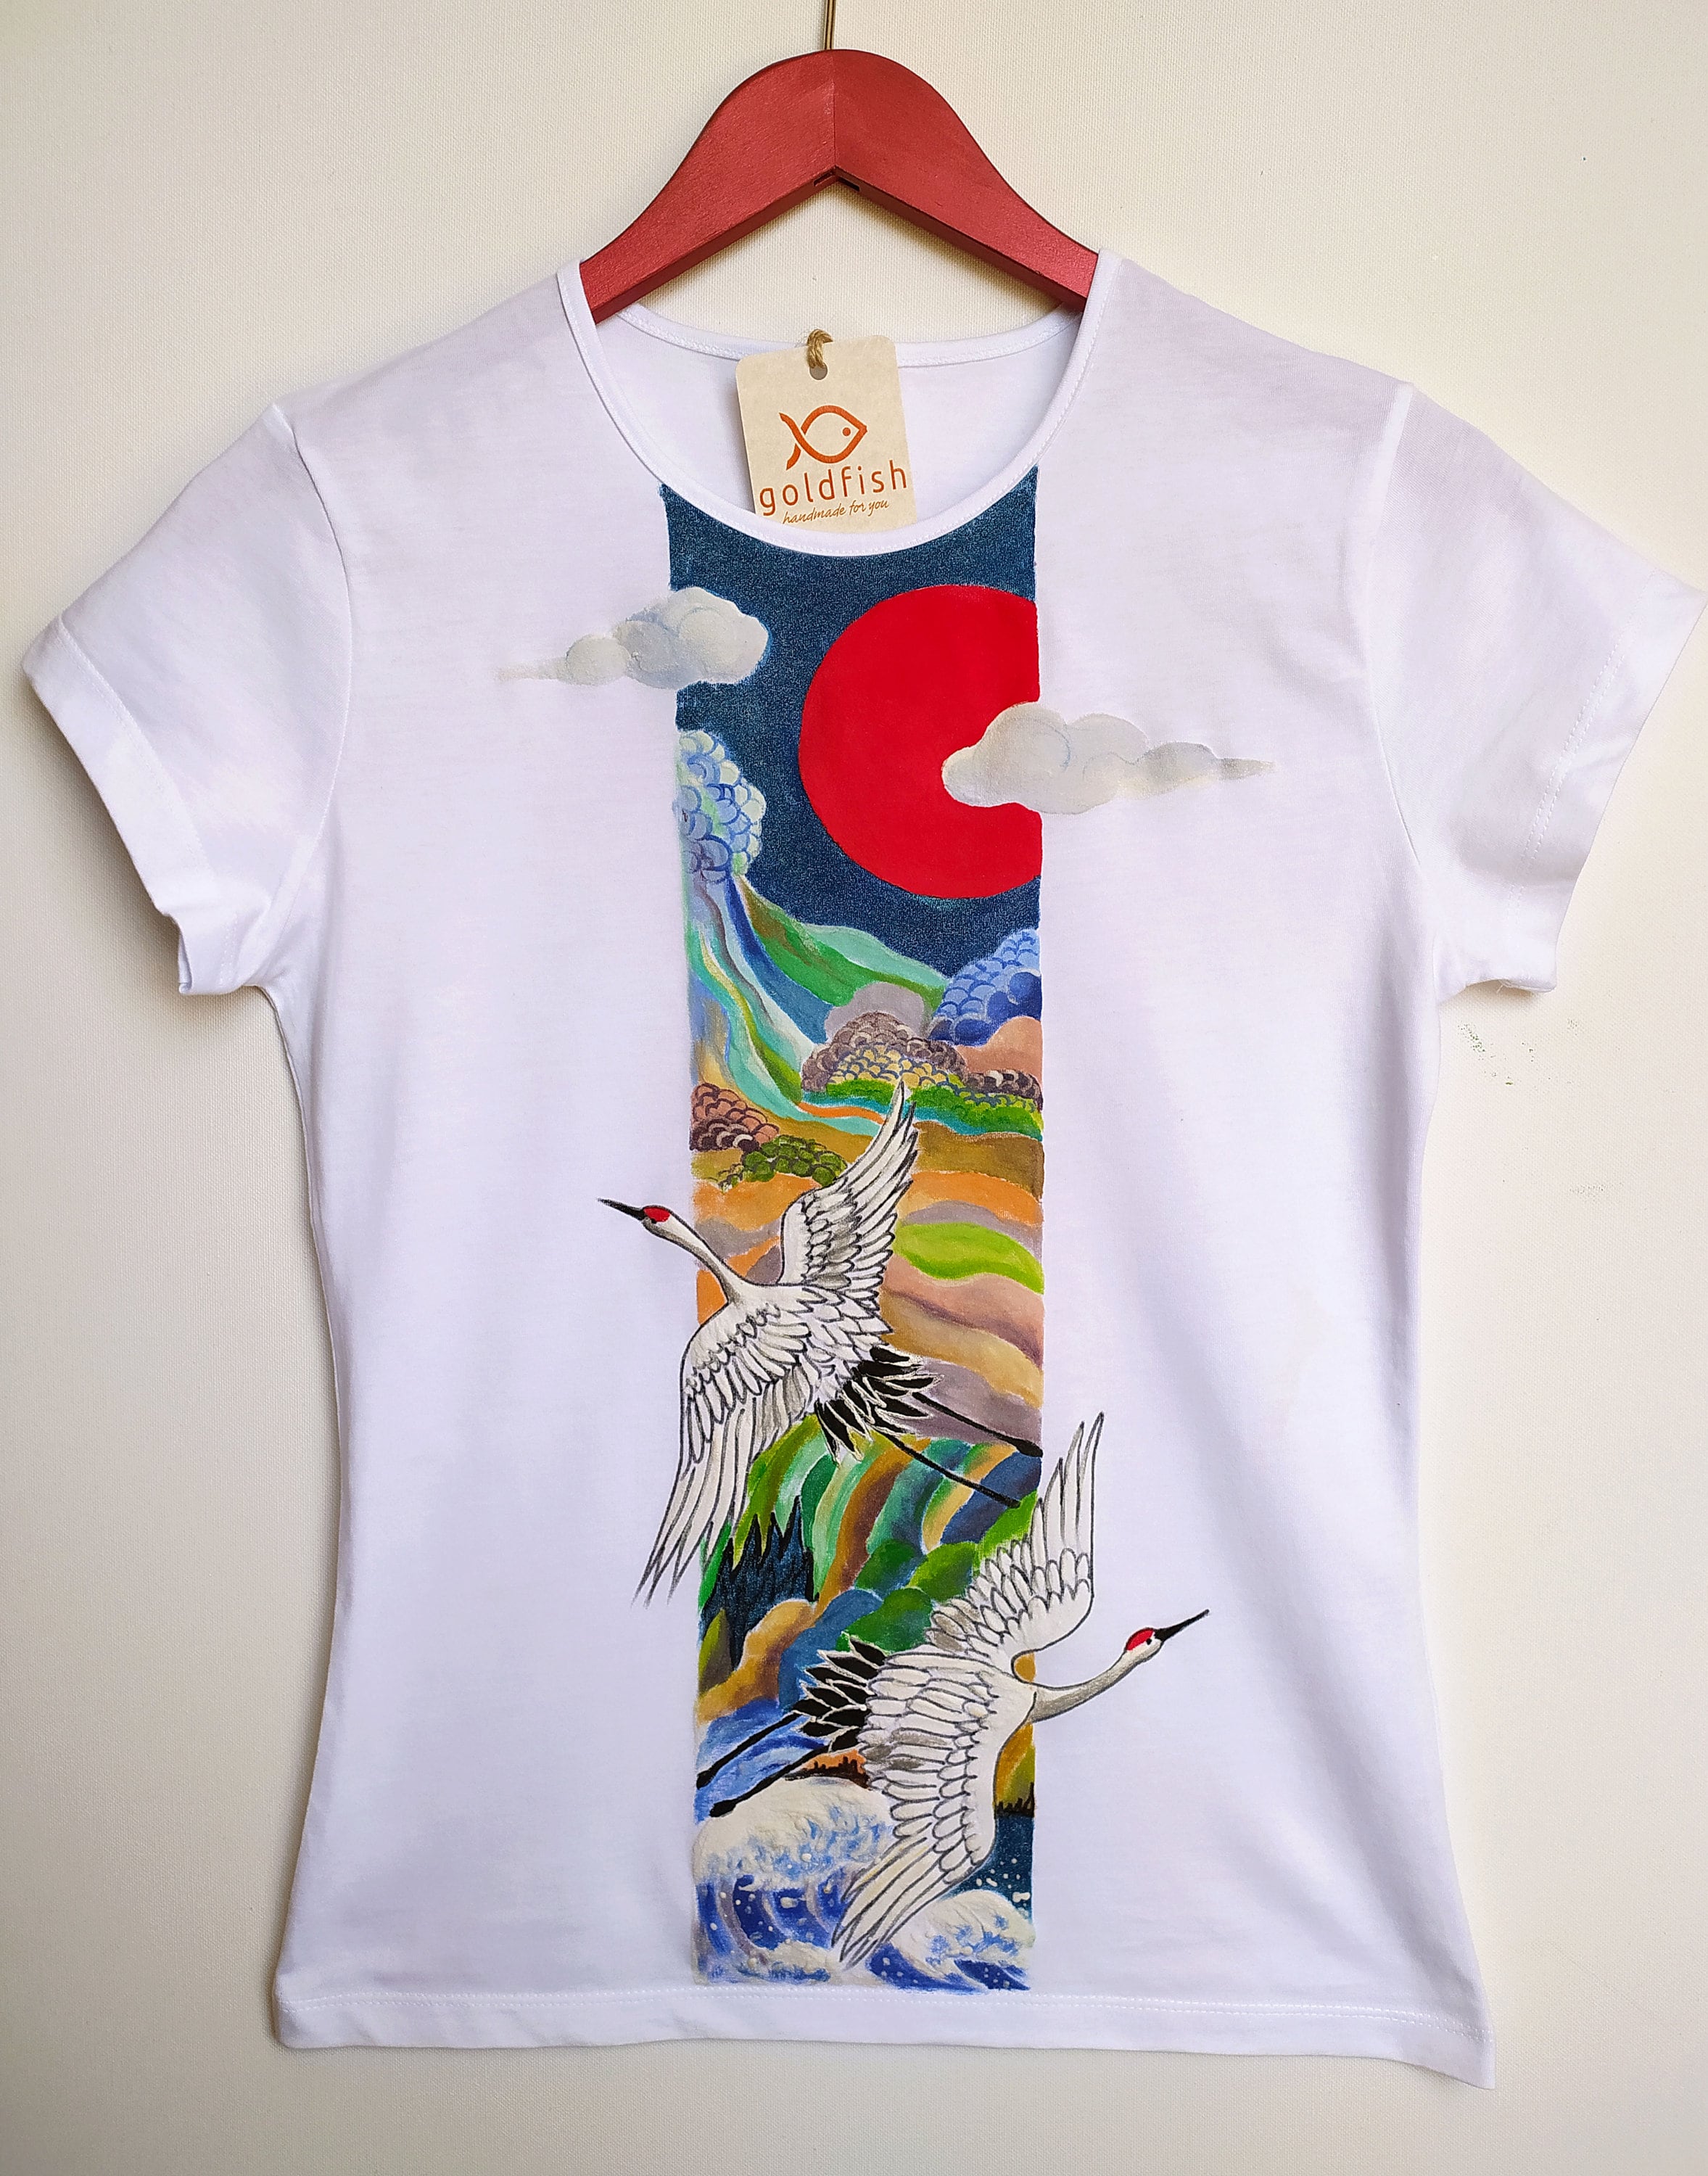 Hand-painted T-shirt for Women Inspired by Japanese Art. image pic